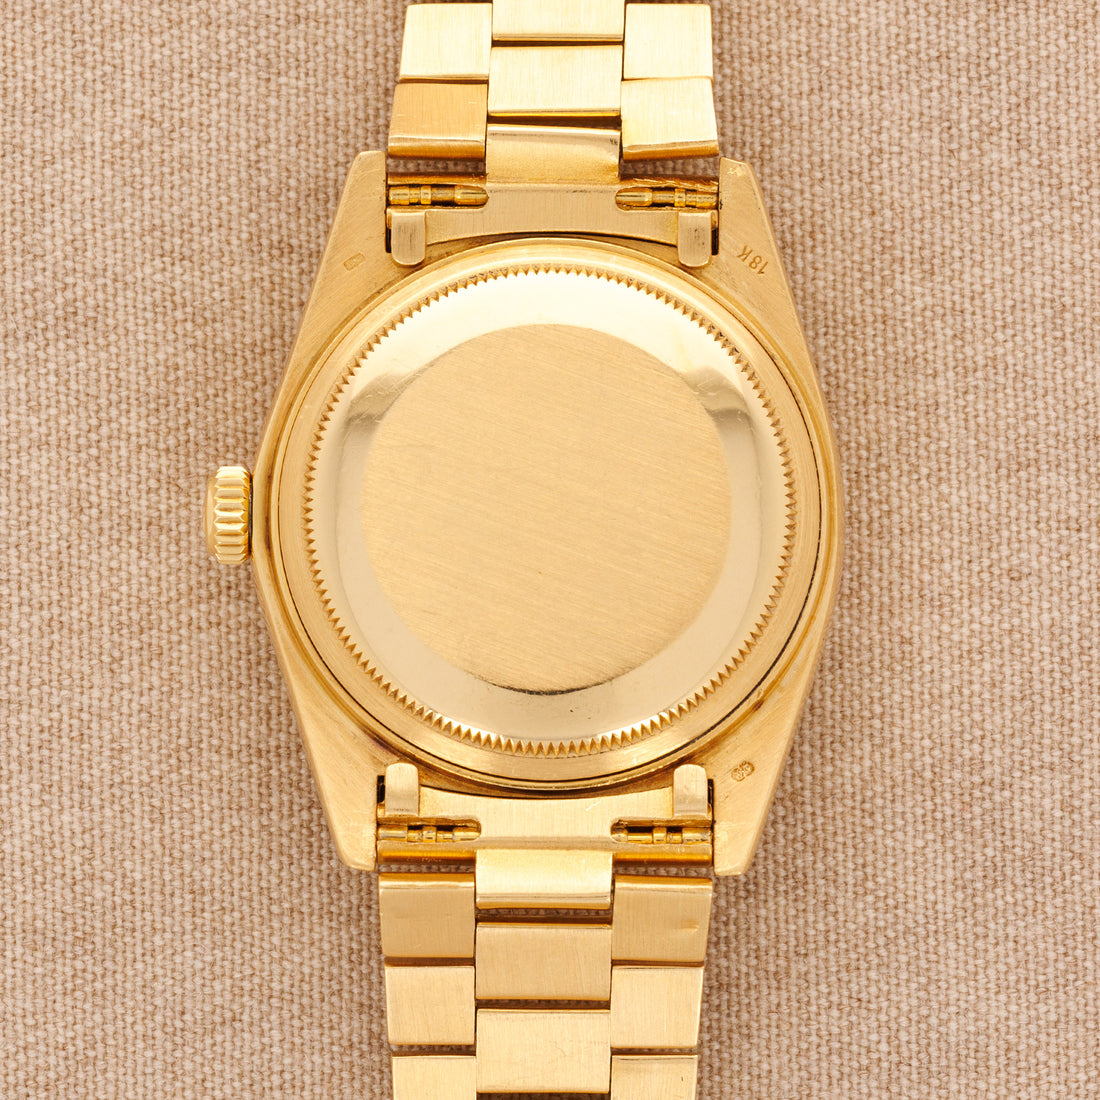 Rolex Yellow Gold Day-Date Ref. 18038 with Wood Dial